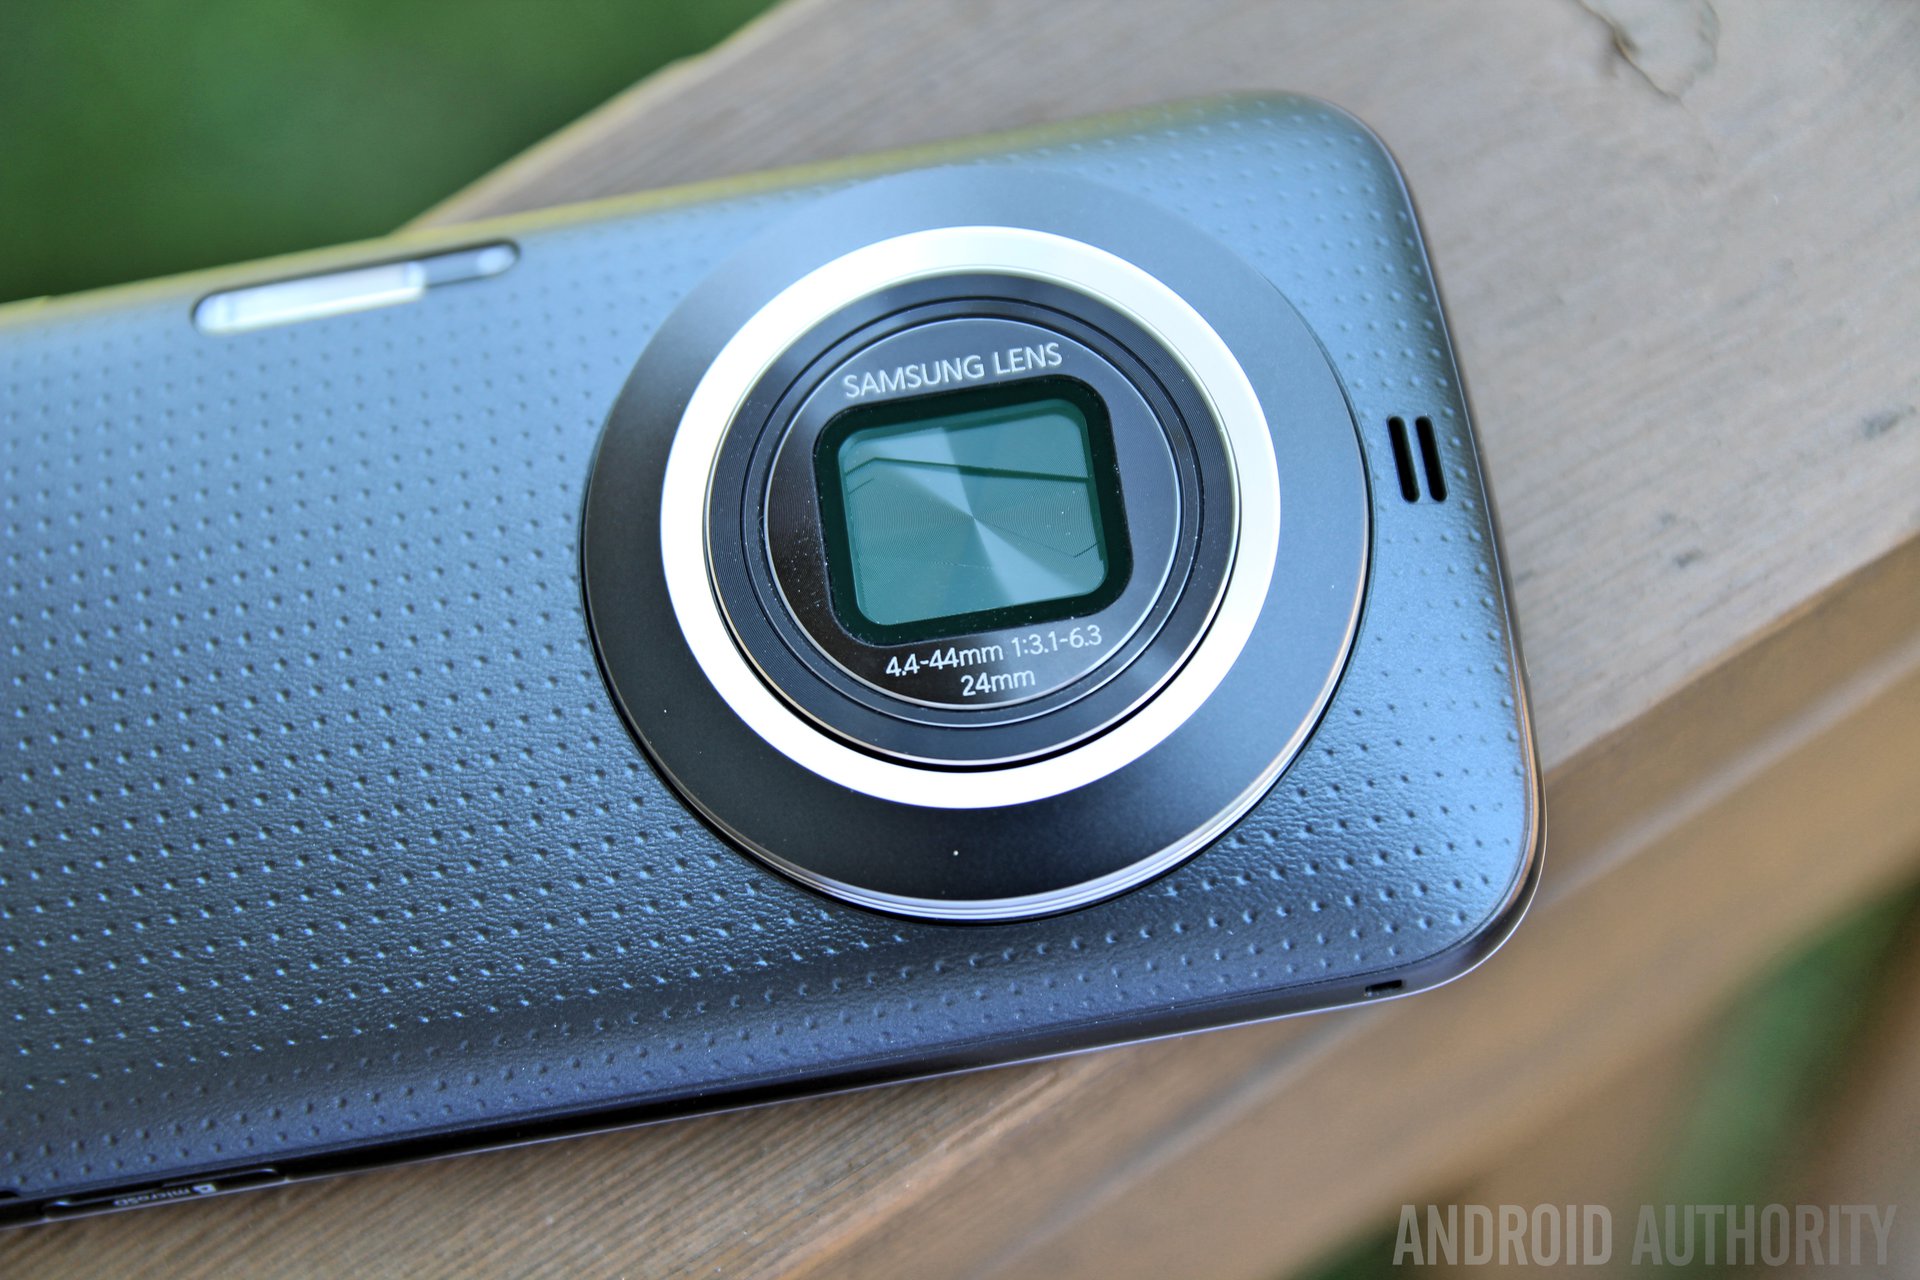 Samsung Galaxy K Zoom review